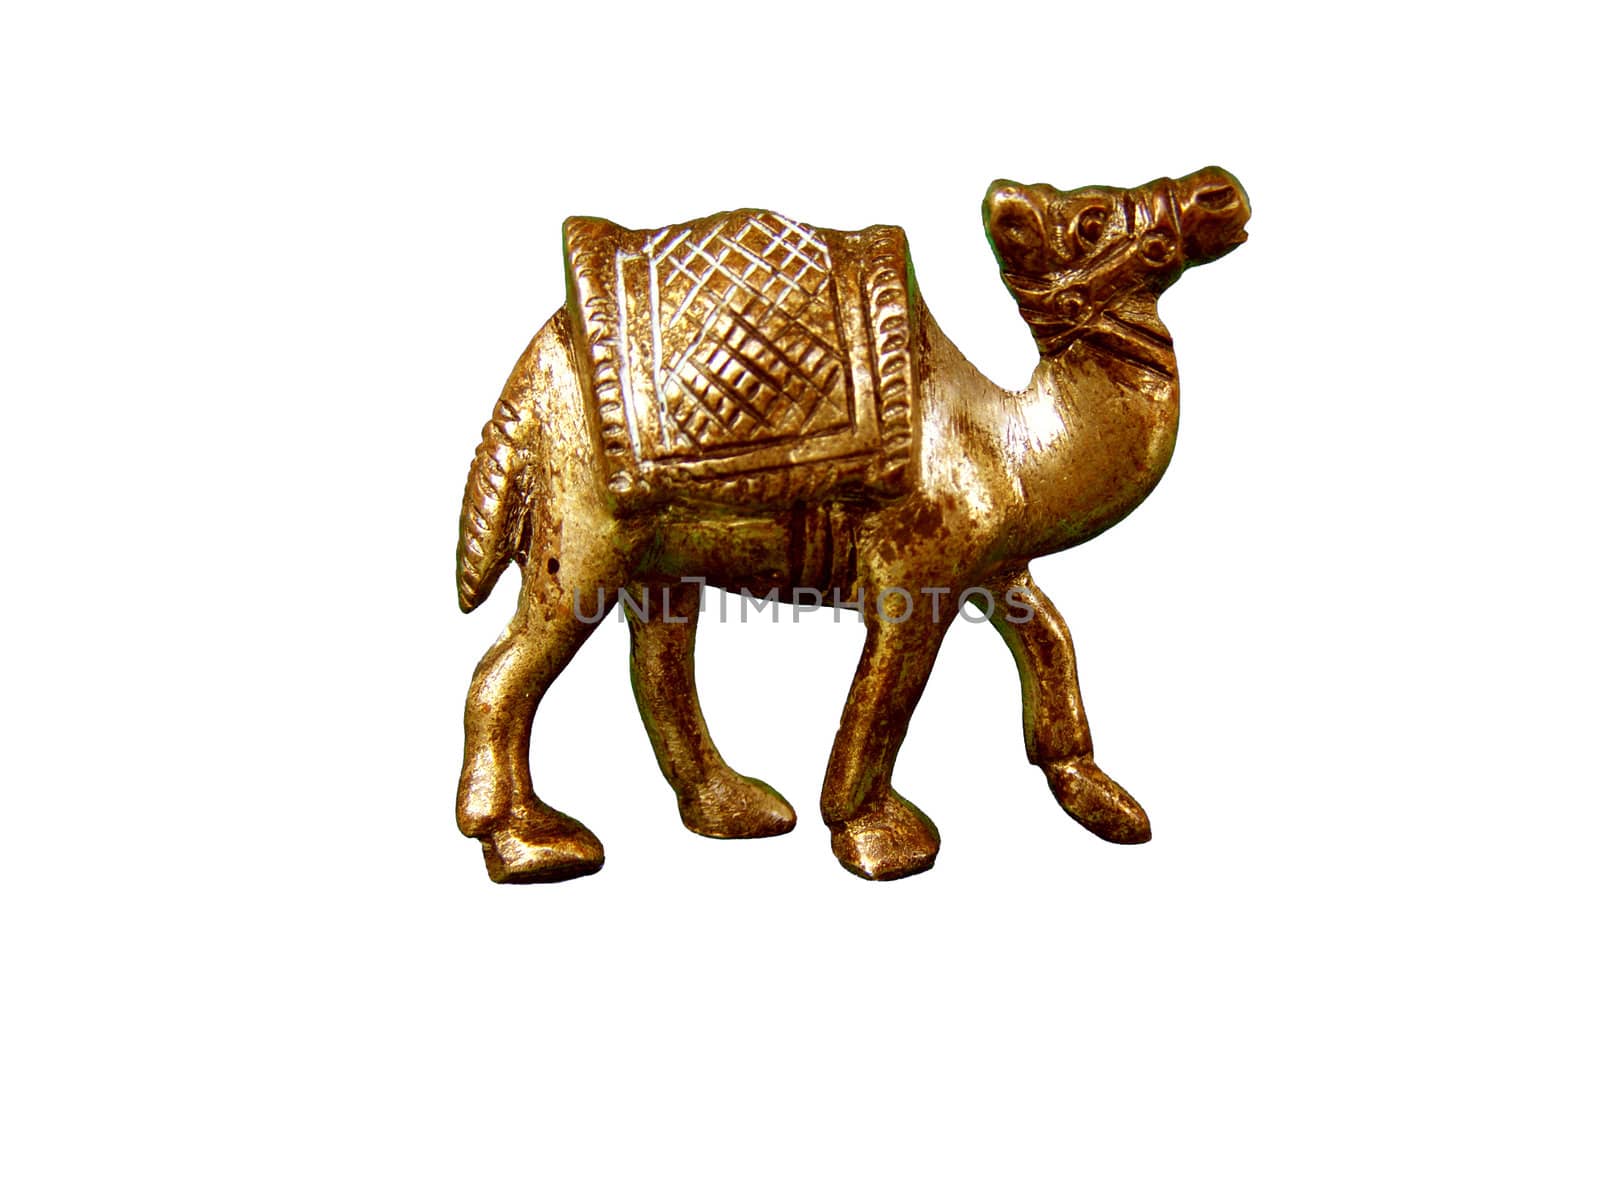 isolated picture of bronze statuette of camel    